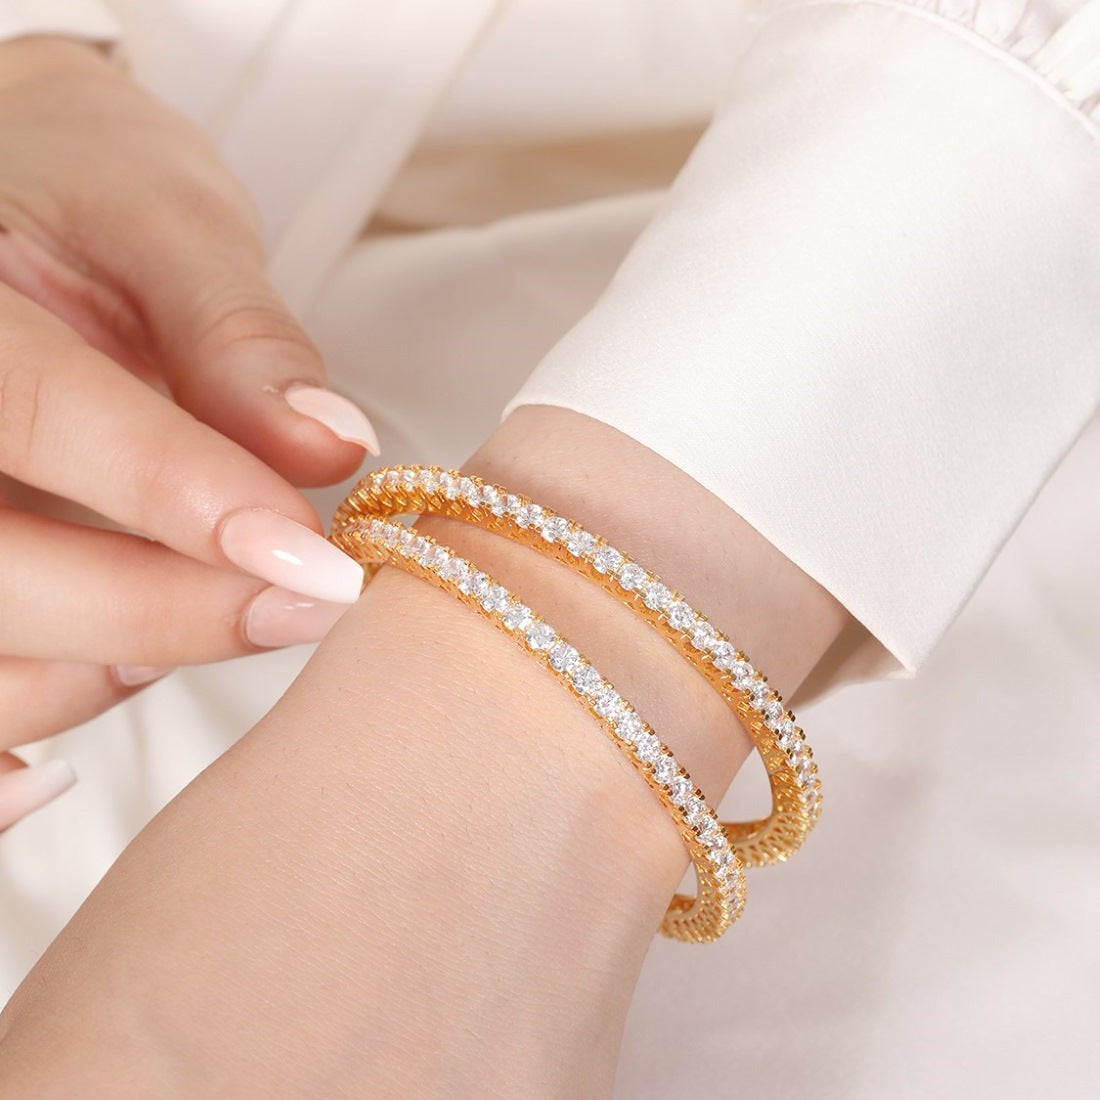 Gleaming Beauty Gold-Plated Bangle with White Cubic Zirconia